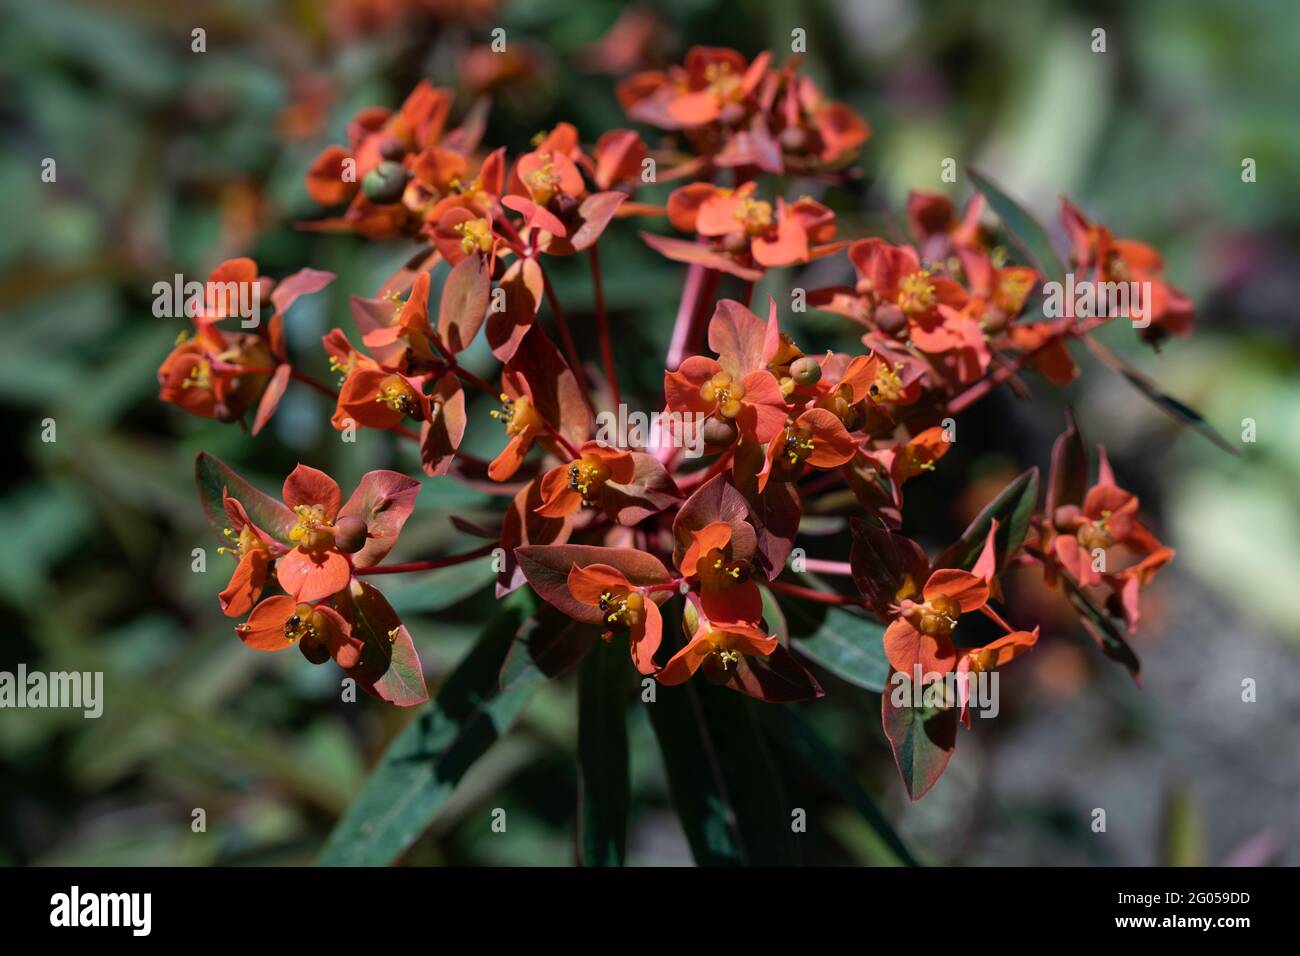 Bright Euphorbia Griffithii is a species of flowering plant in the spurge family Euphorbiaceae. Green blurred background Stock Photo